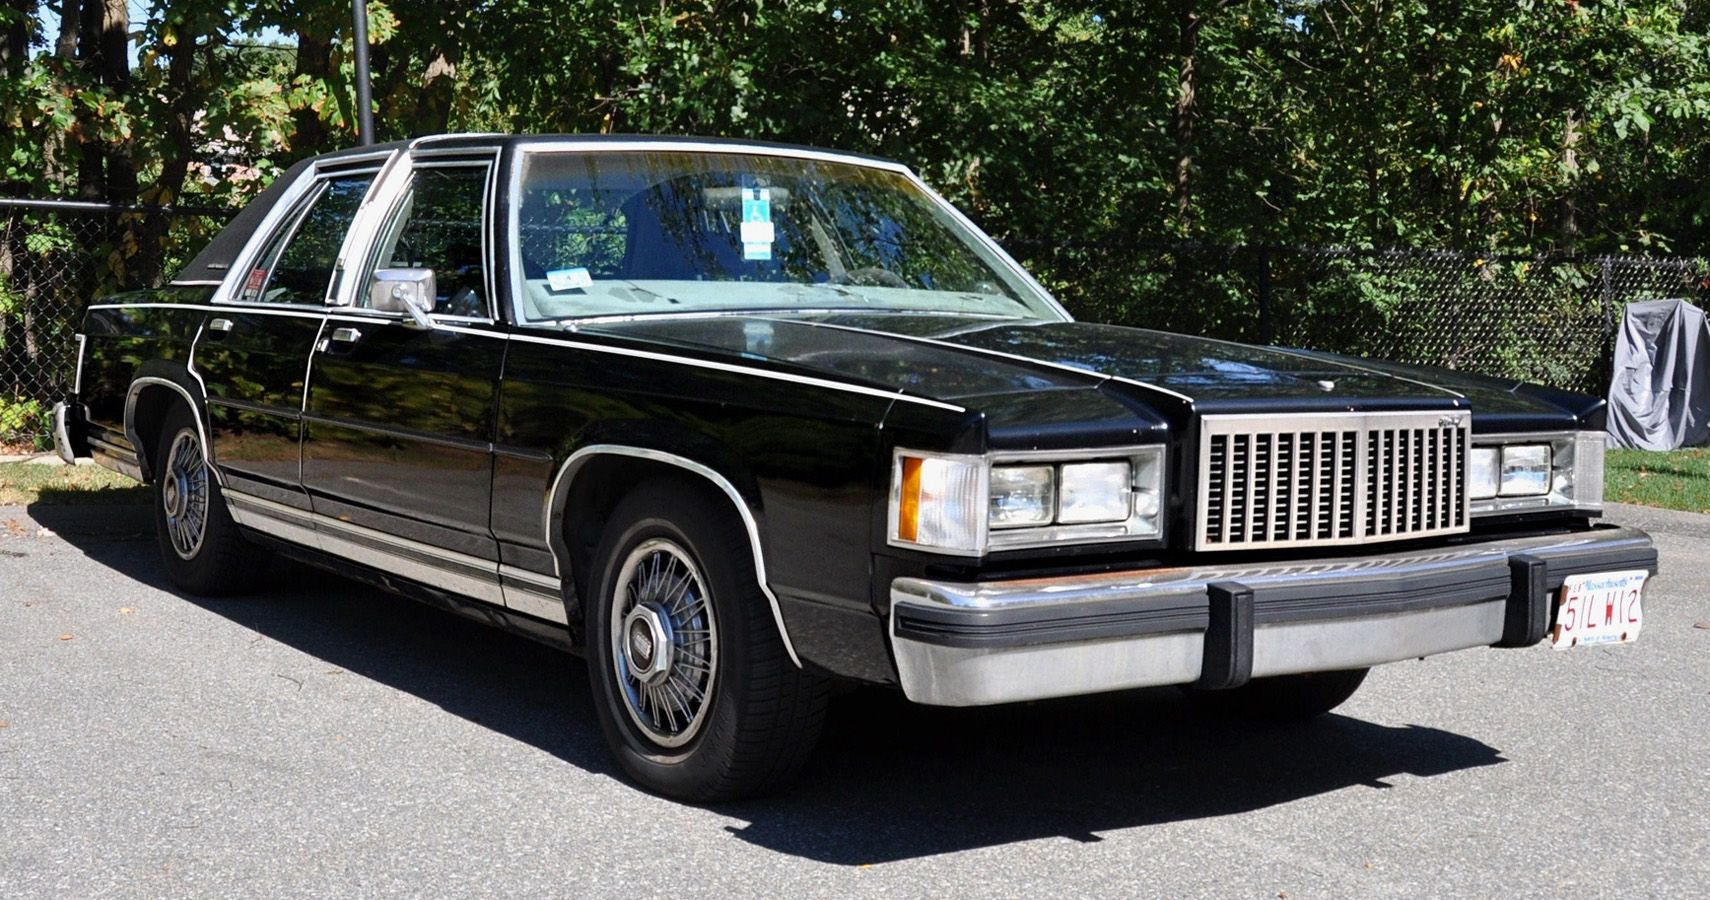 1980s Mercury Grand Marquis is the ideal restomod car